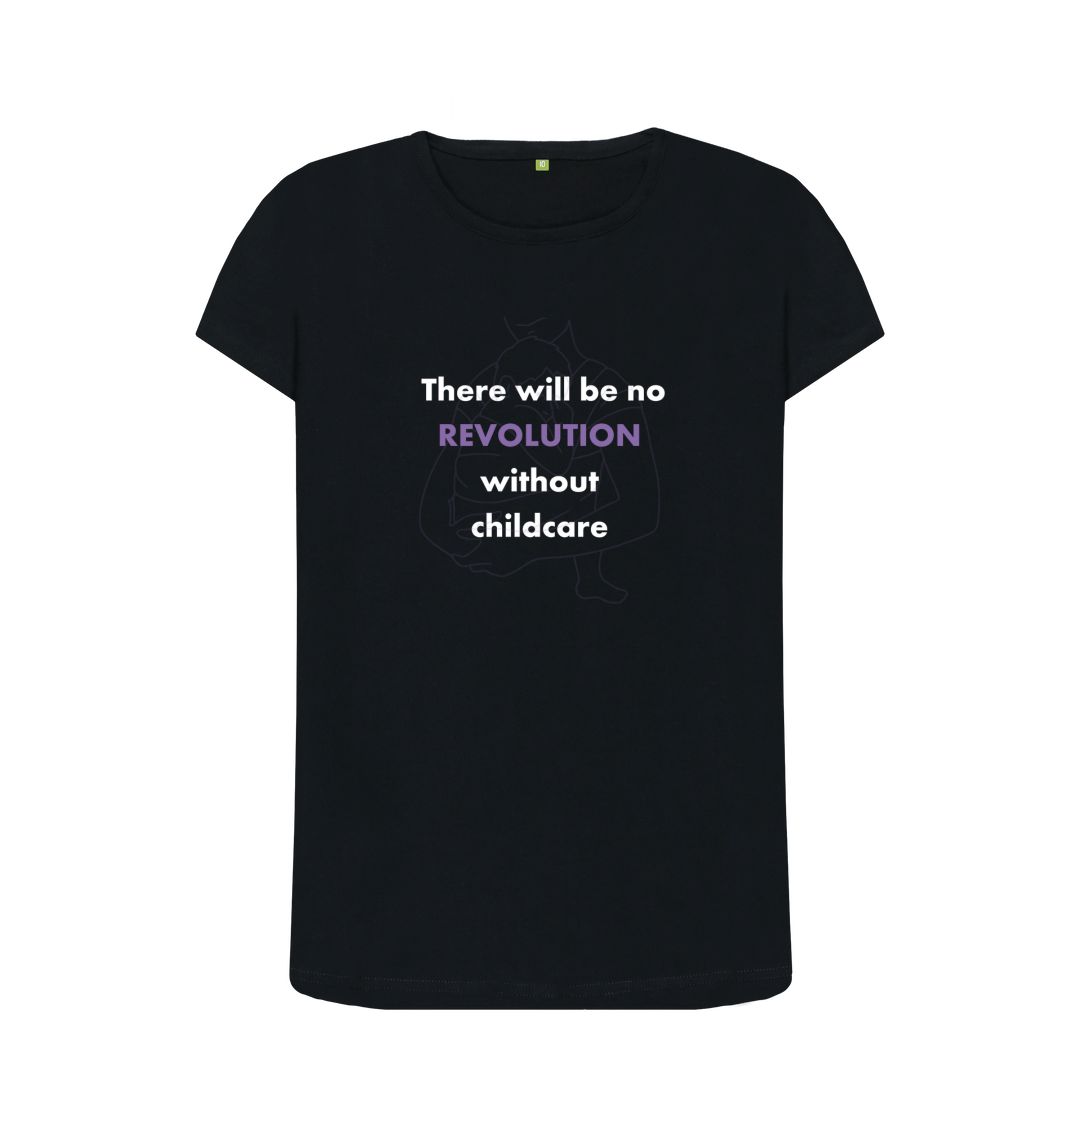 Black Feminist T-shirt - There will be no revolution without childcare